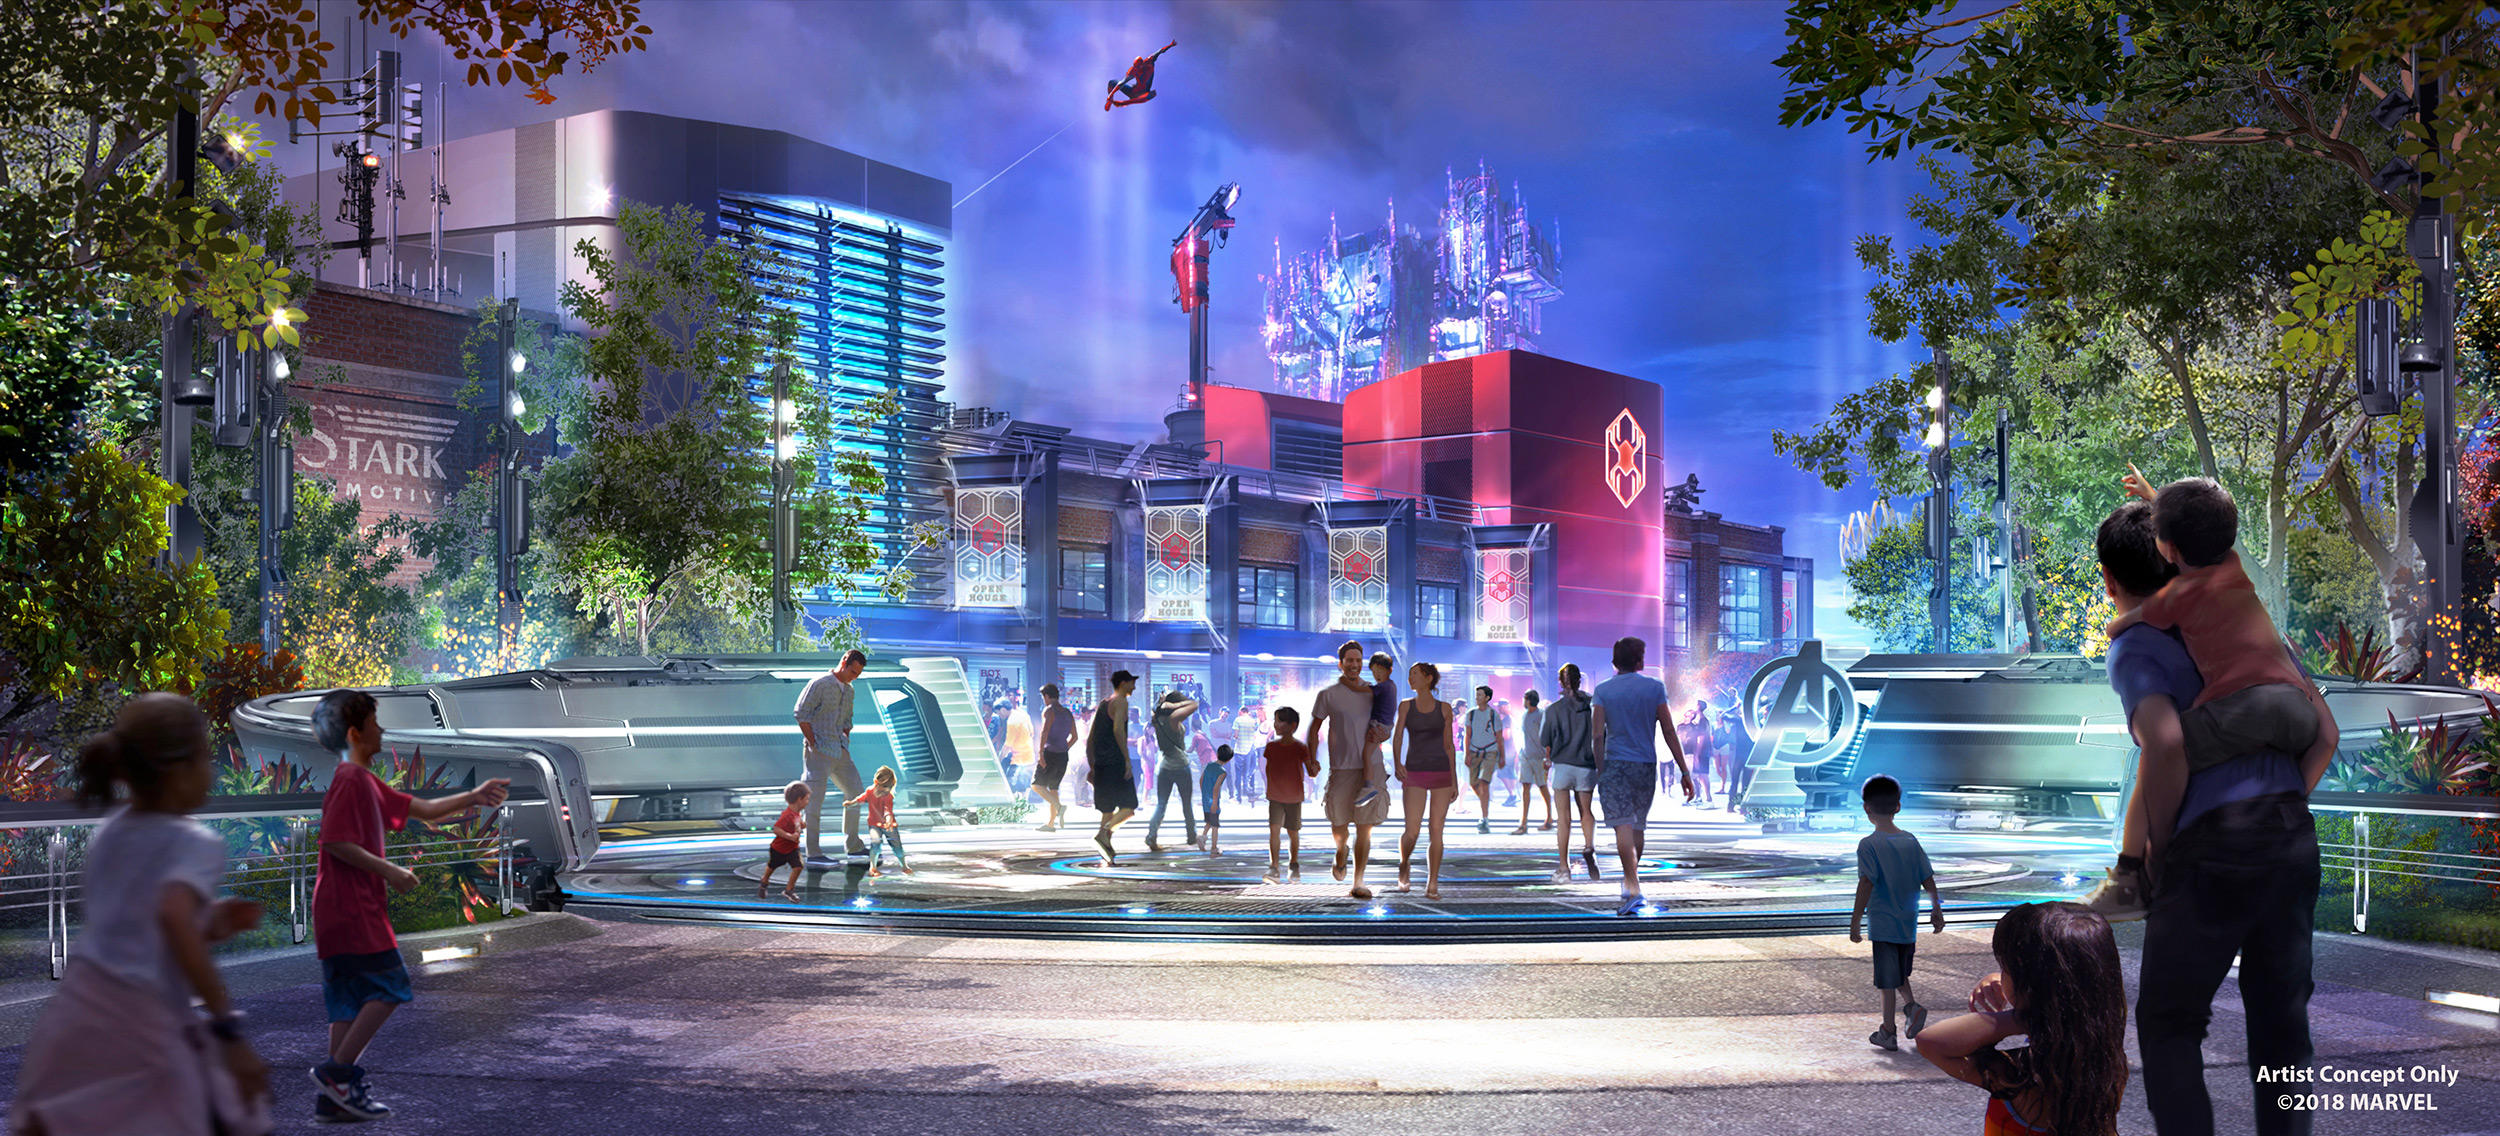 Concept Art for New Spider-Man Attraction at Disney California Adventure Released